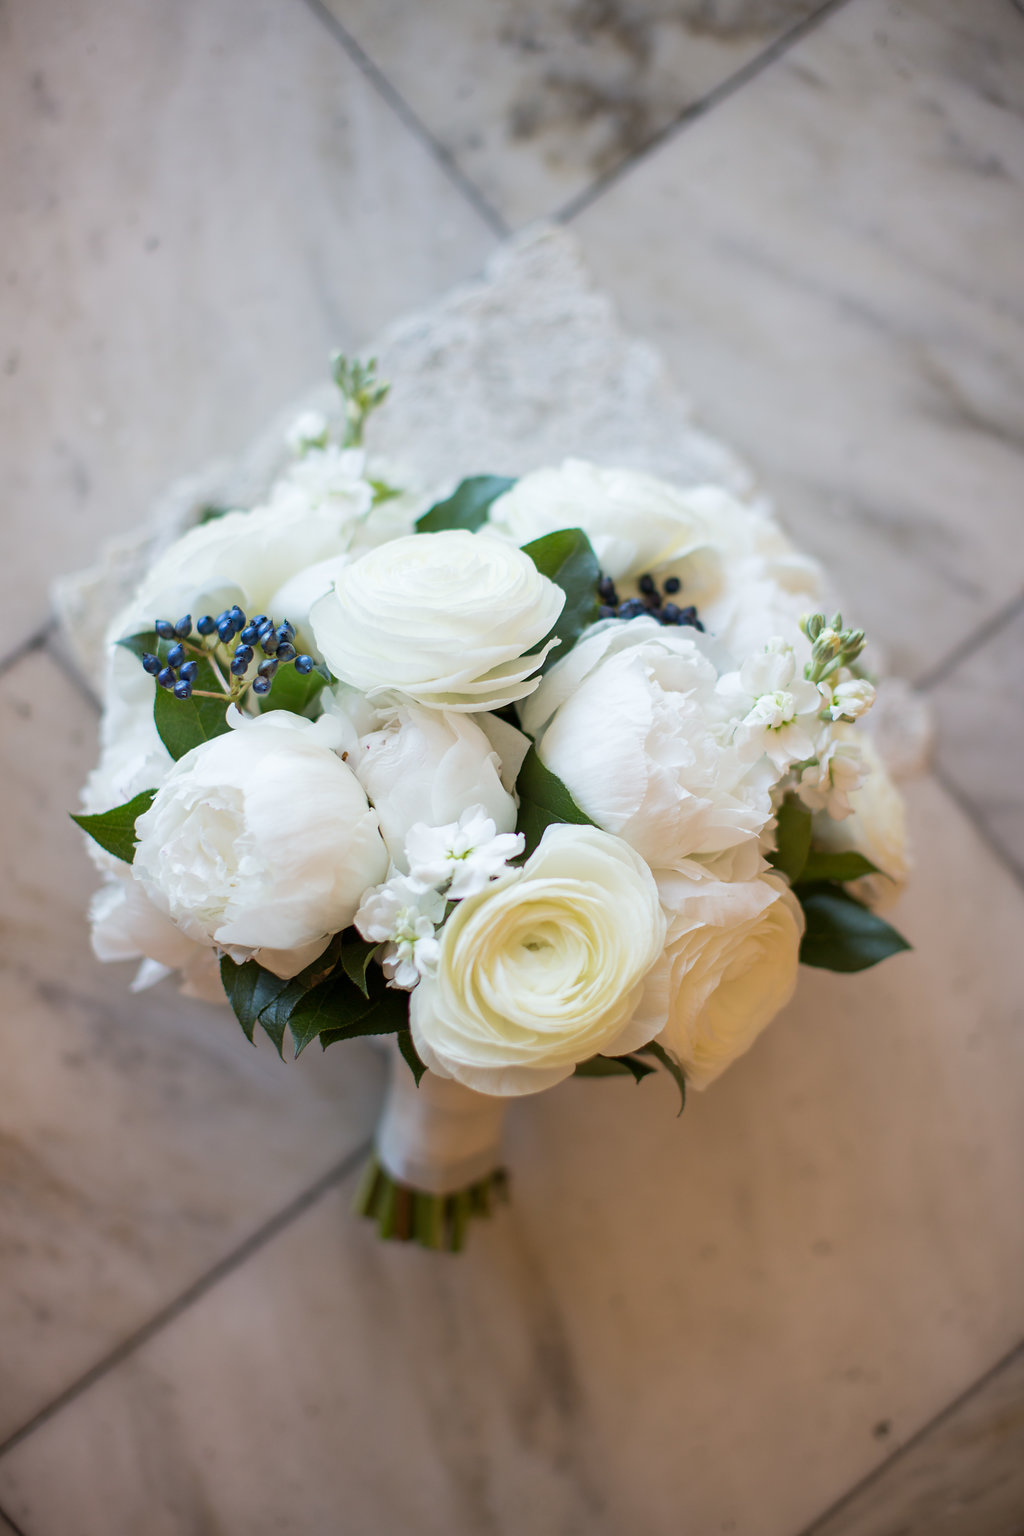 Monochromatic bridal bouquet of ranunculus, peonie, stock, and berries.